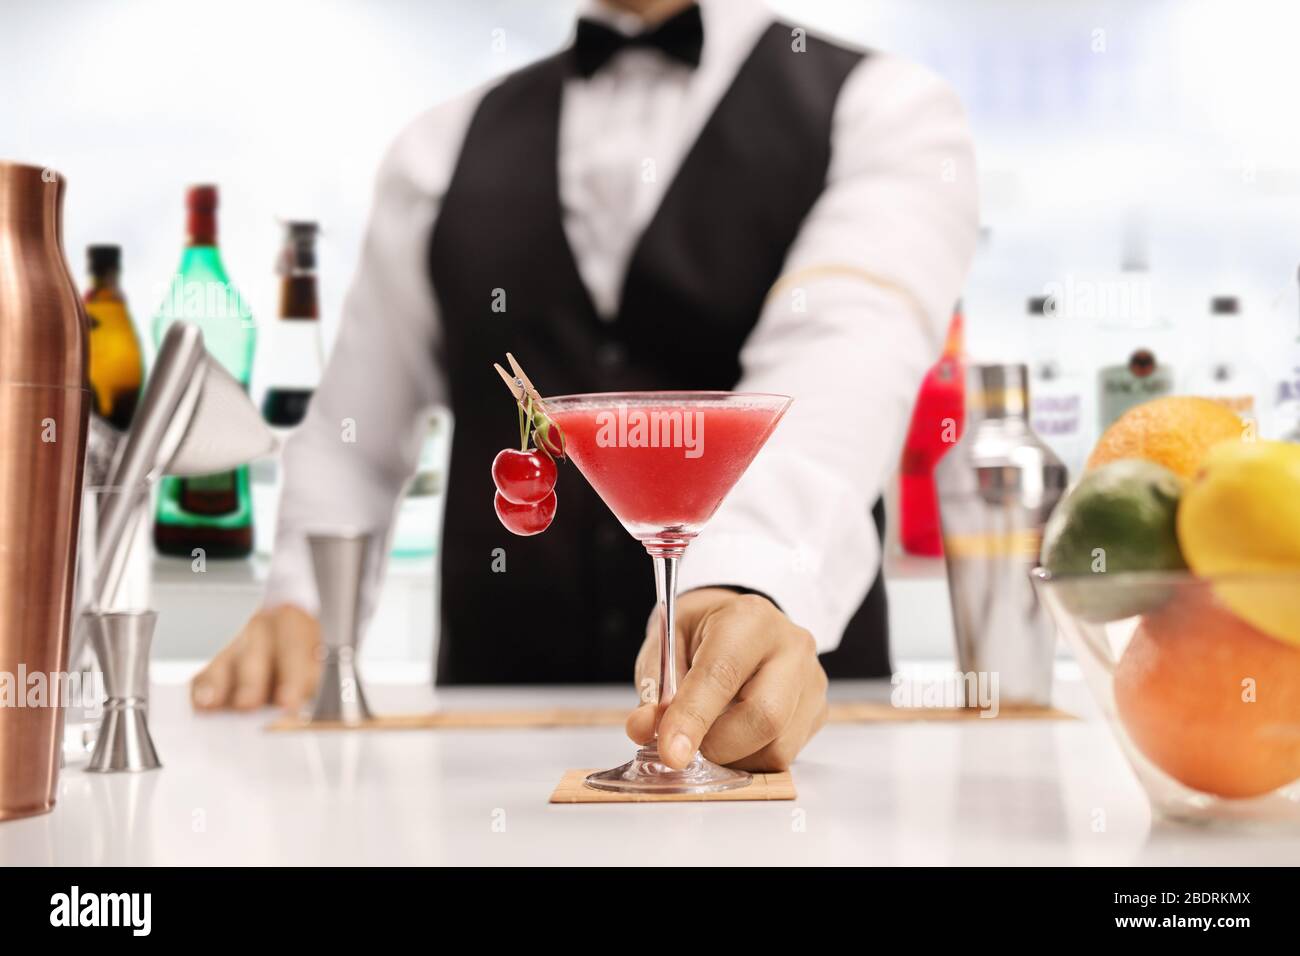 Bartender serving an alcoholic cocktail drink in a bar Stock Photo